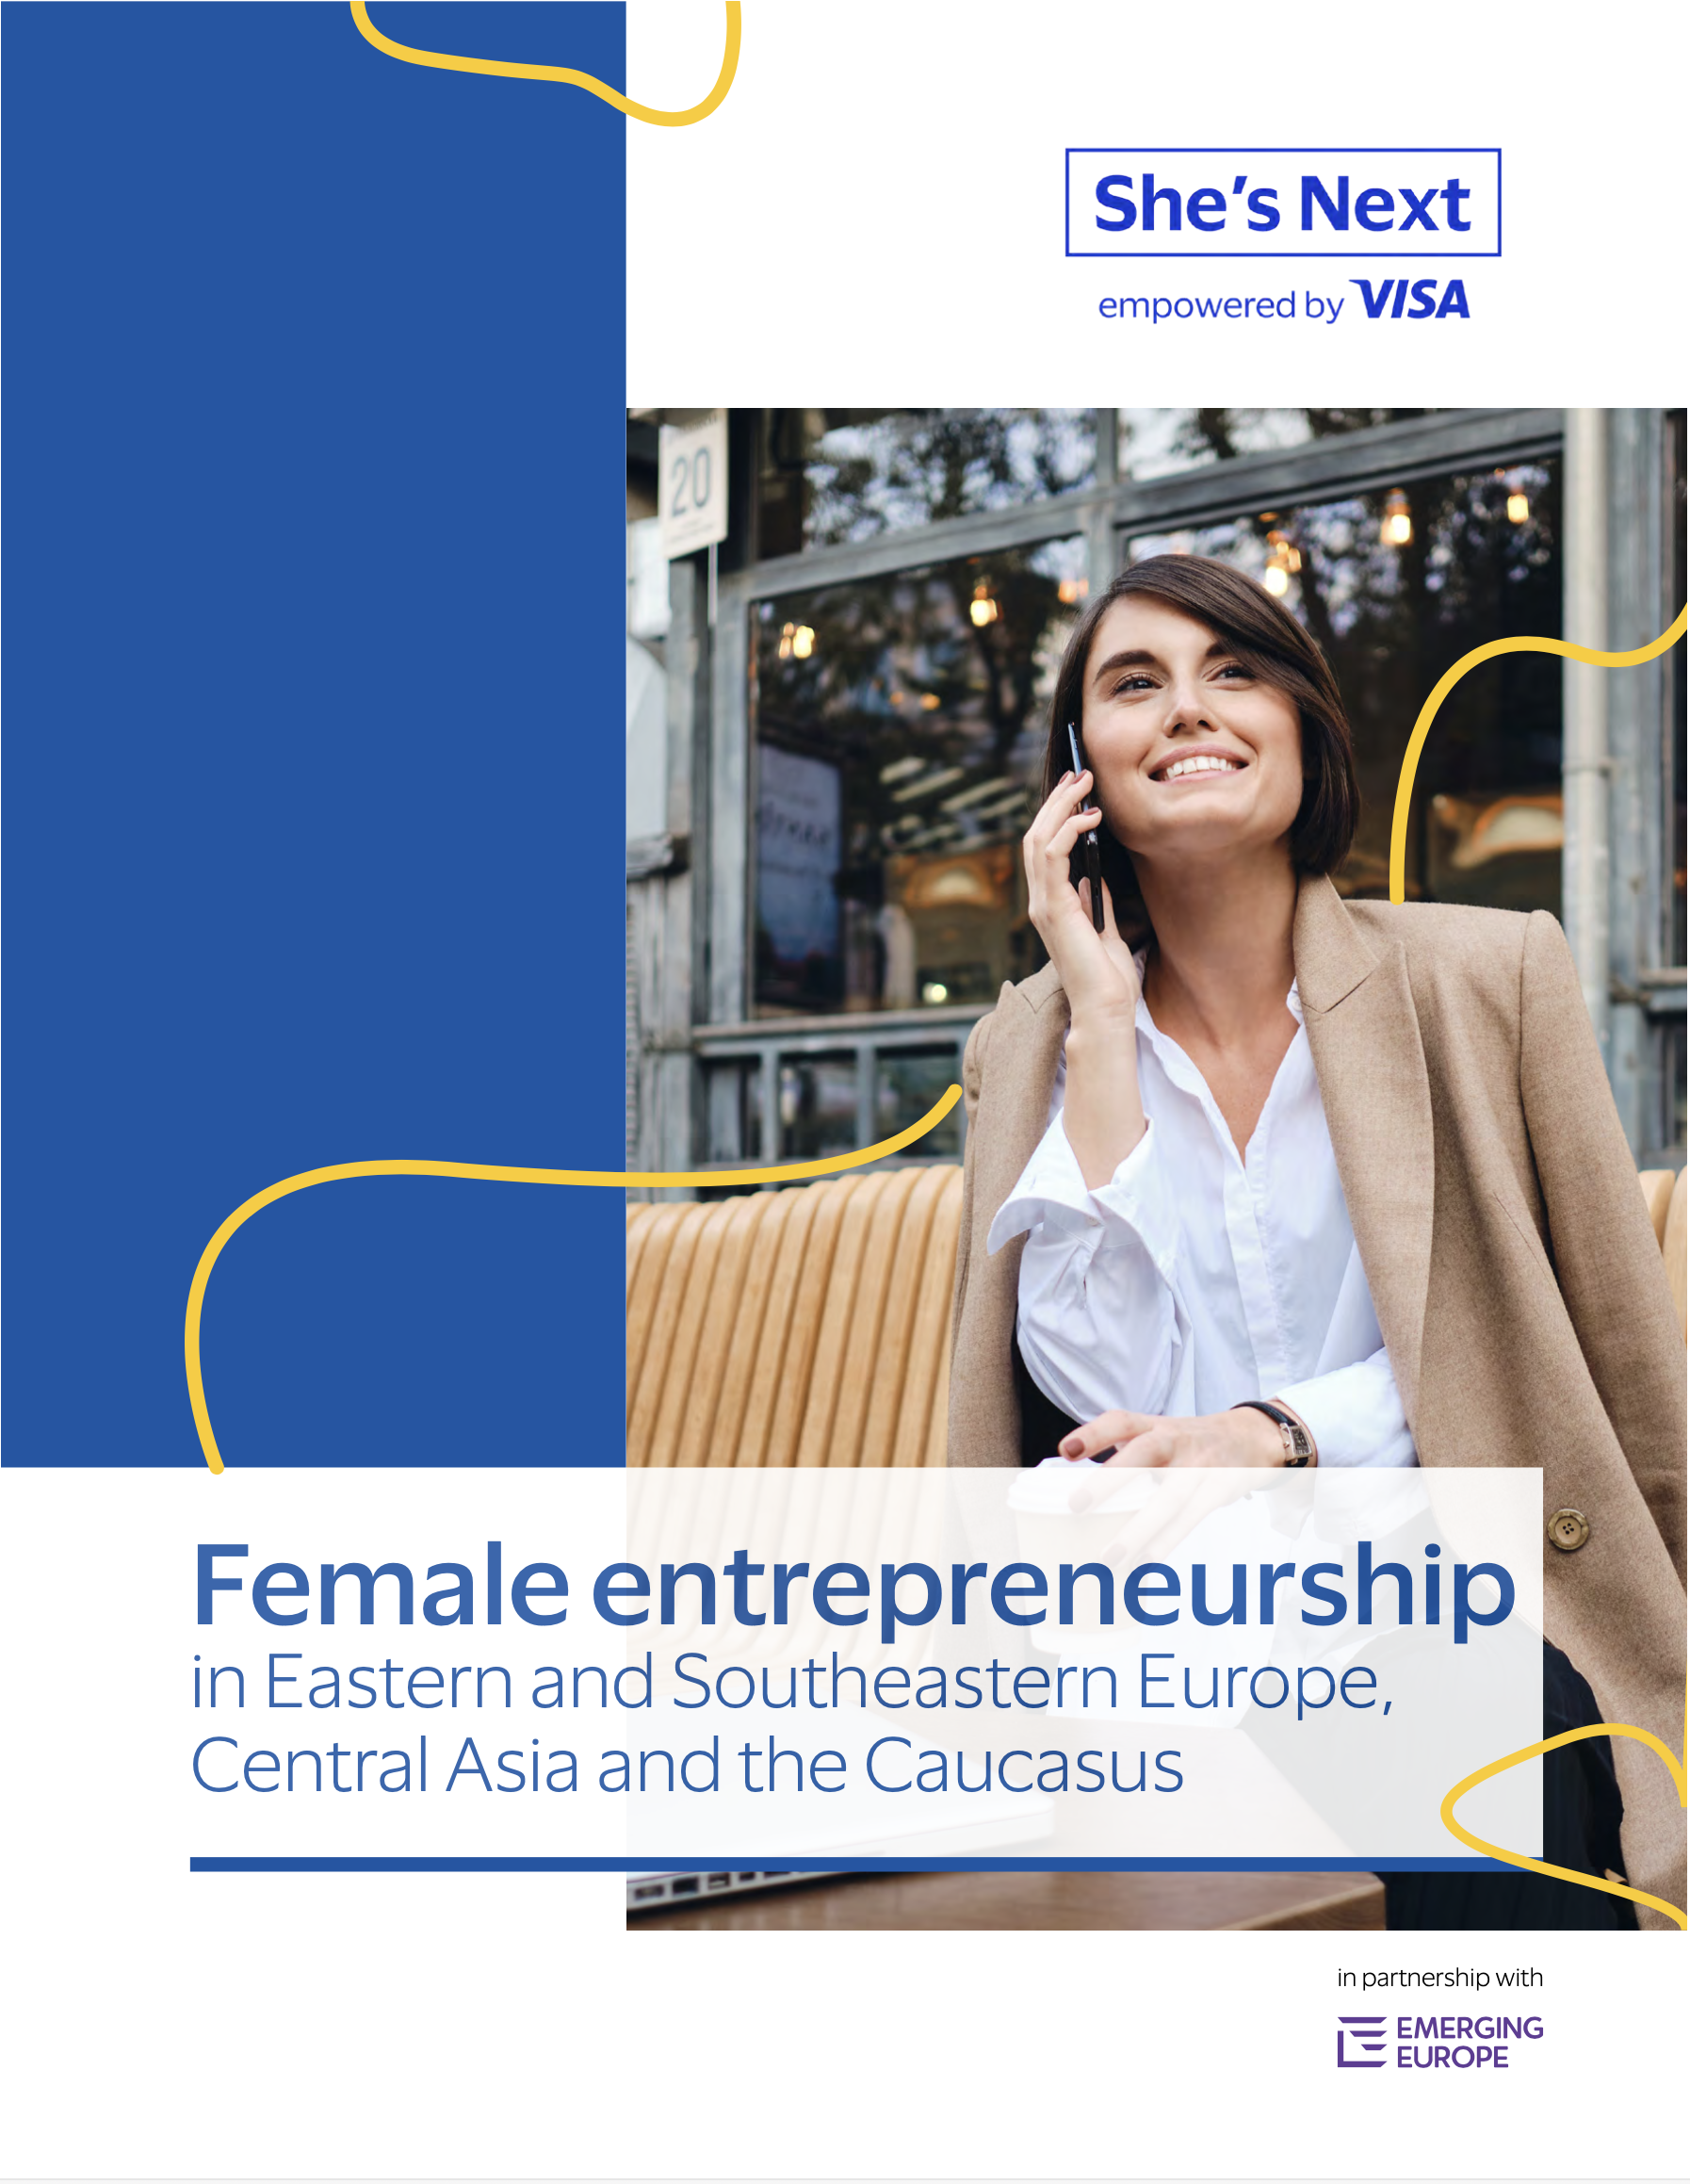 Female entrepreneurship in Eastern and Southeastern Europe, Central Asia and the Caucasus